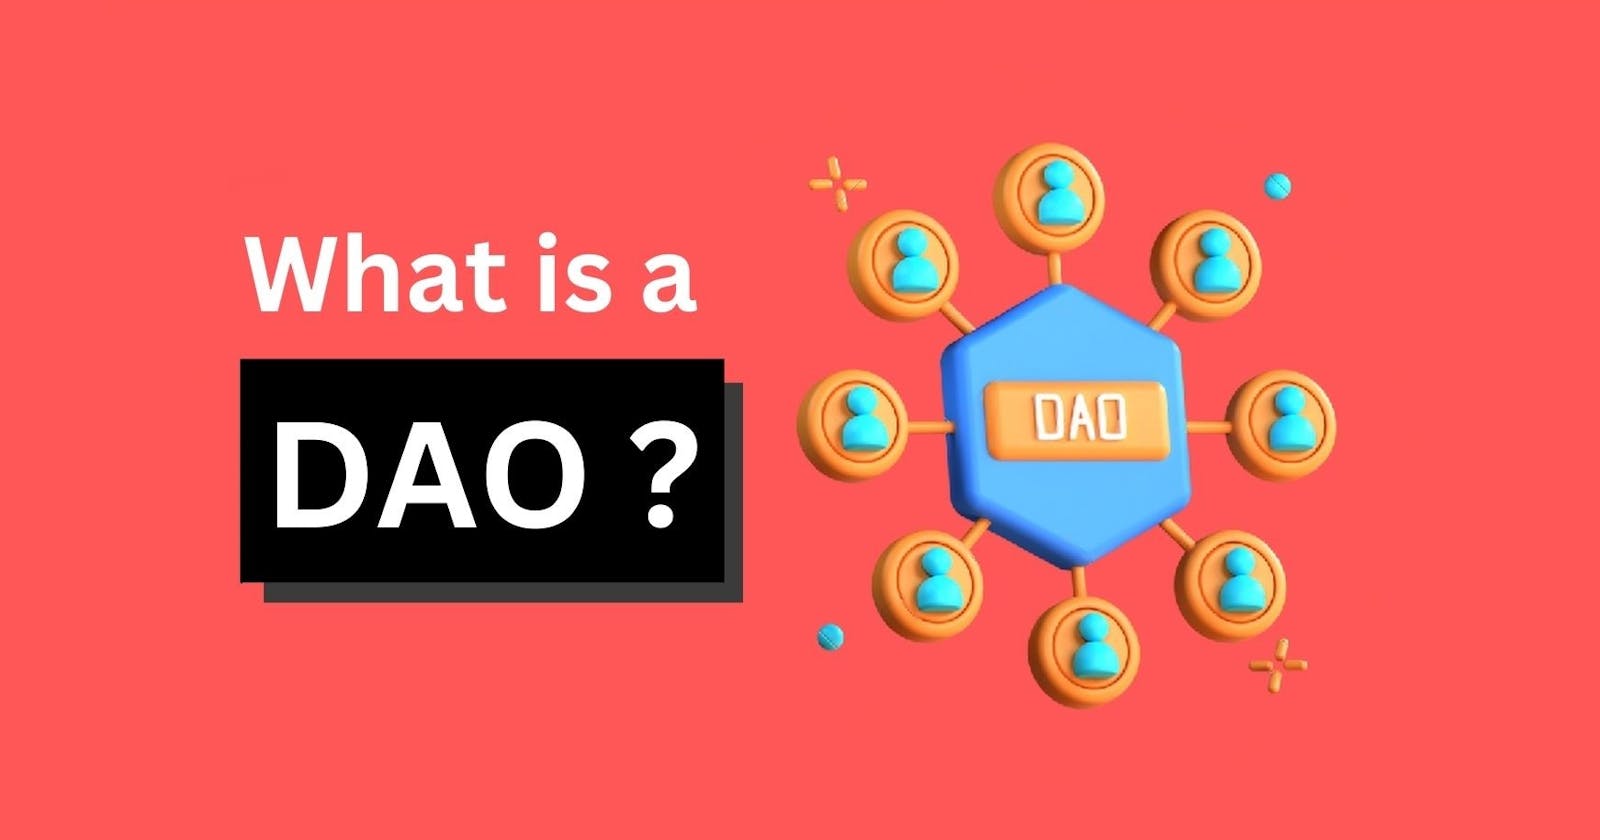 What is a DAO ?